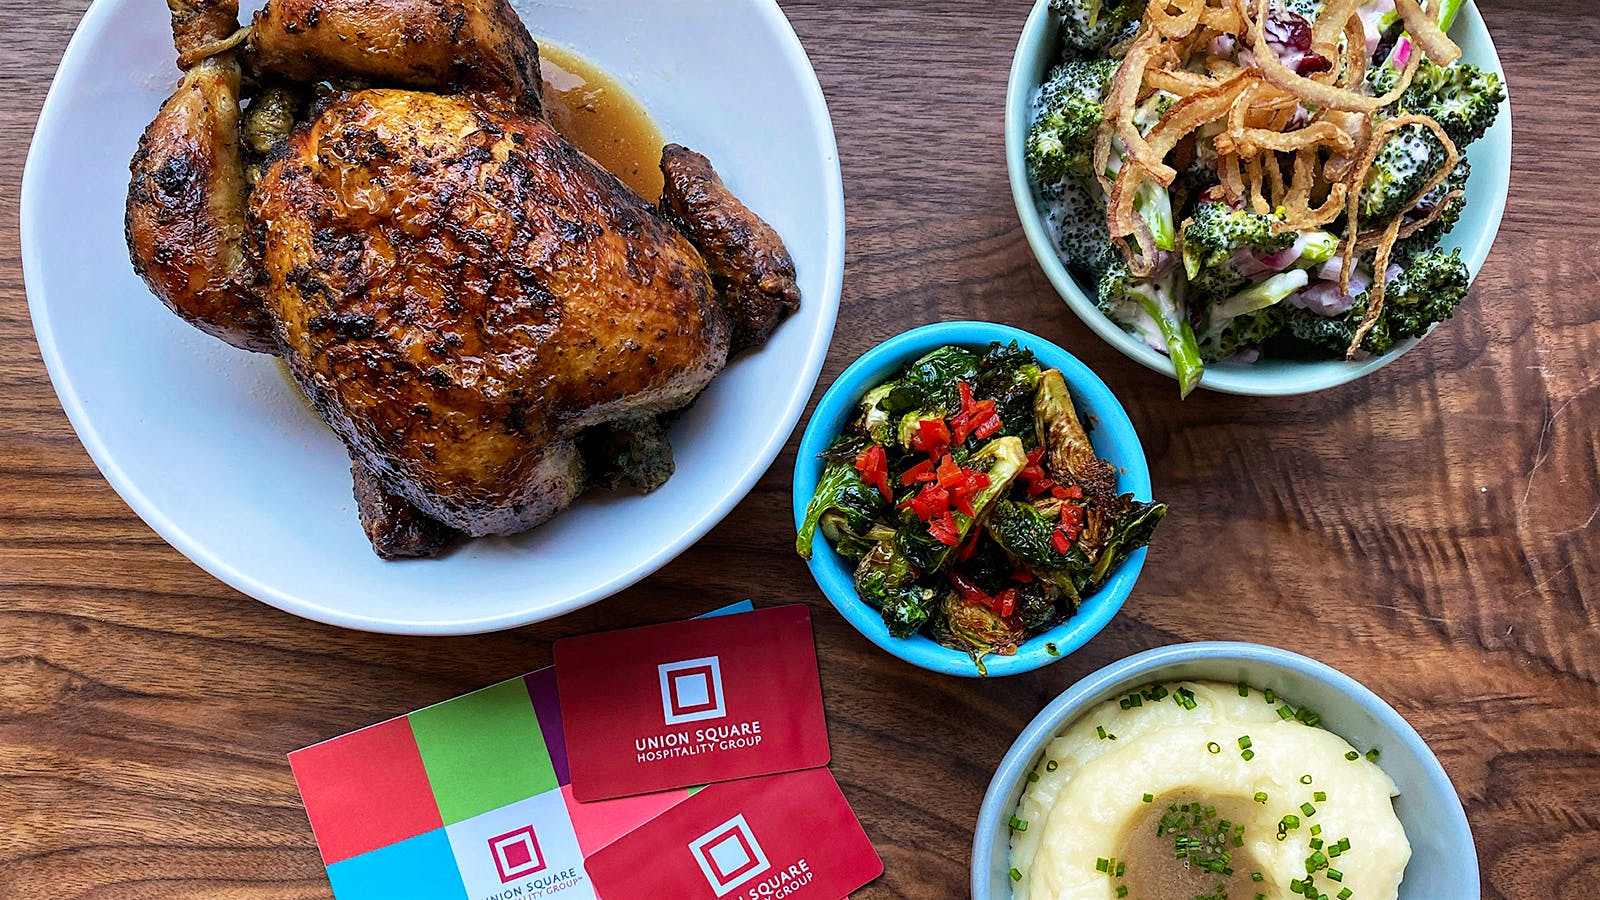 Roast chicken and gift cards from Union Square Hospitality Group